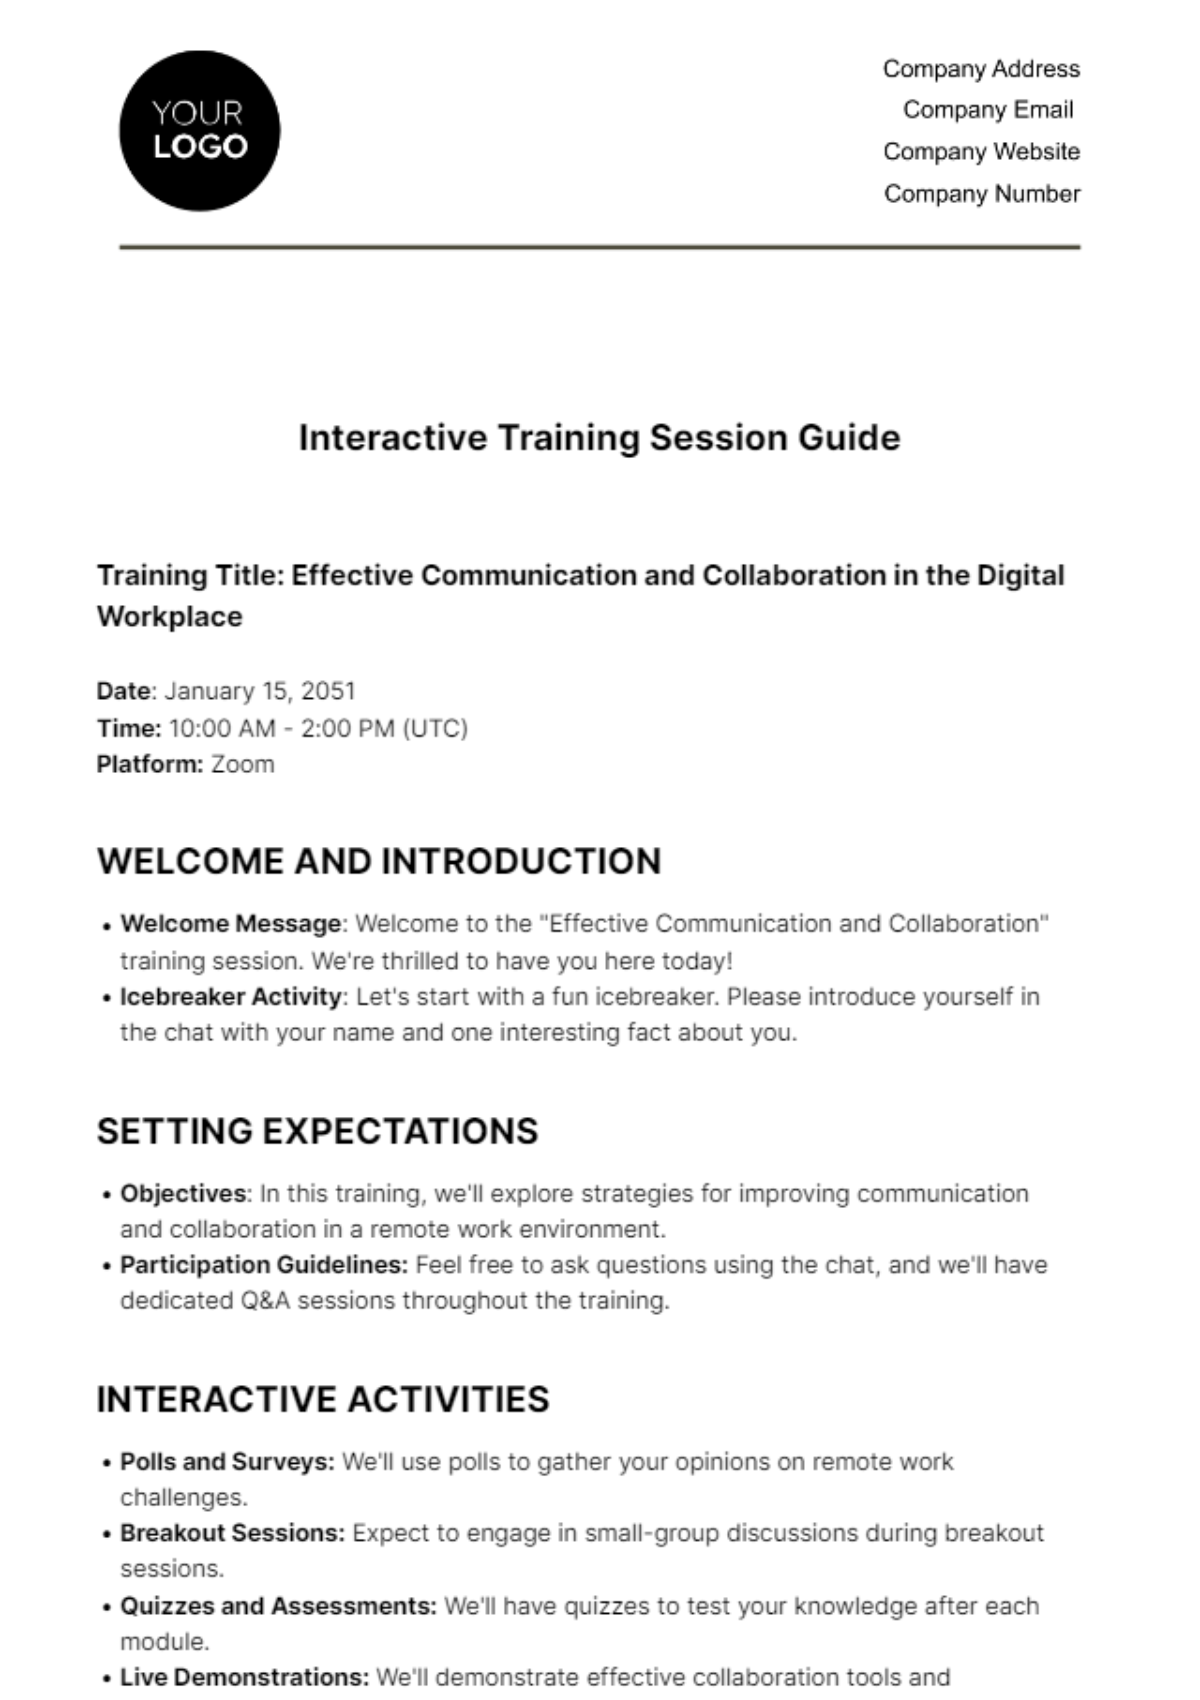 Free Interactive Training Session Guide HR Template